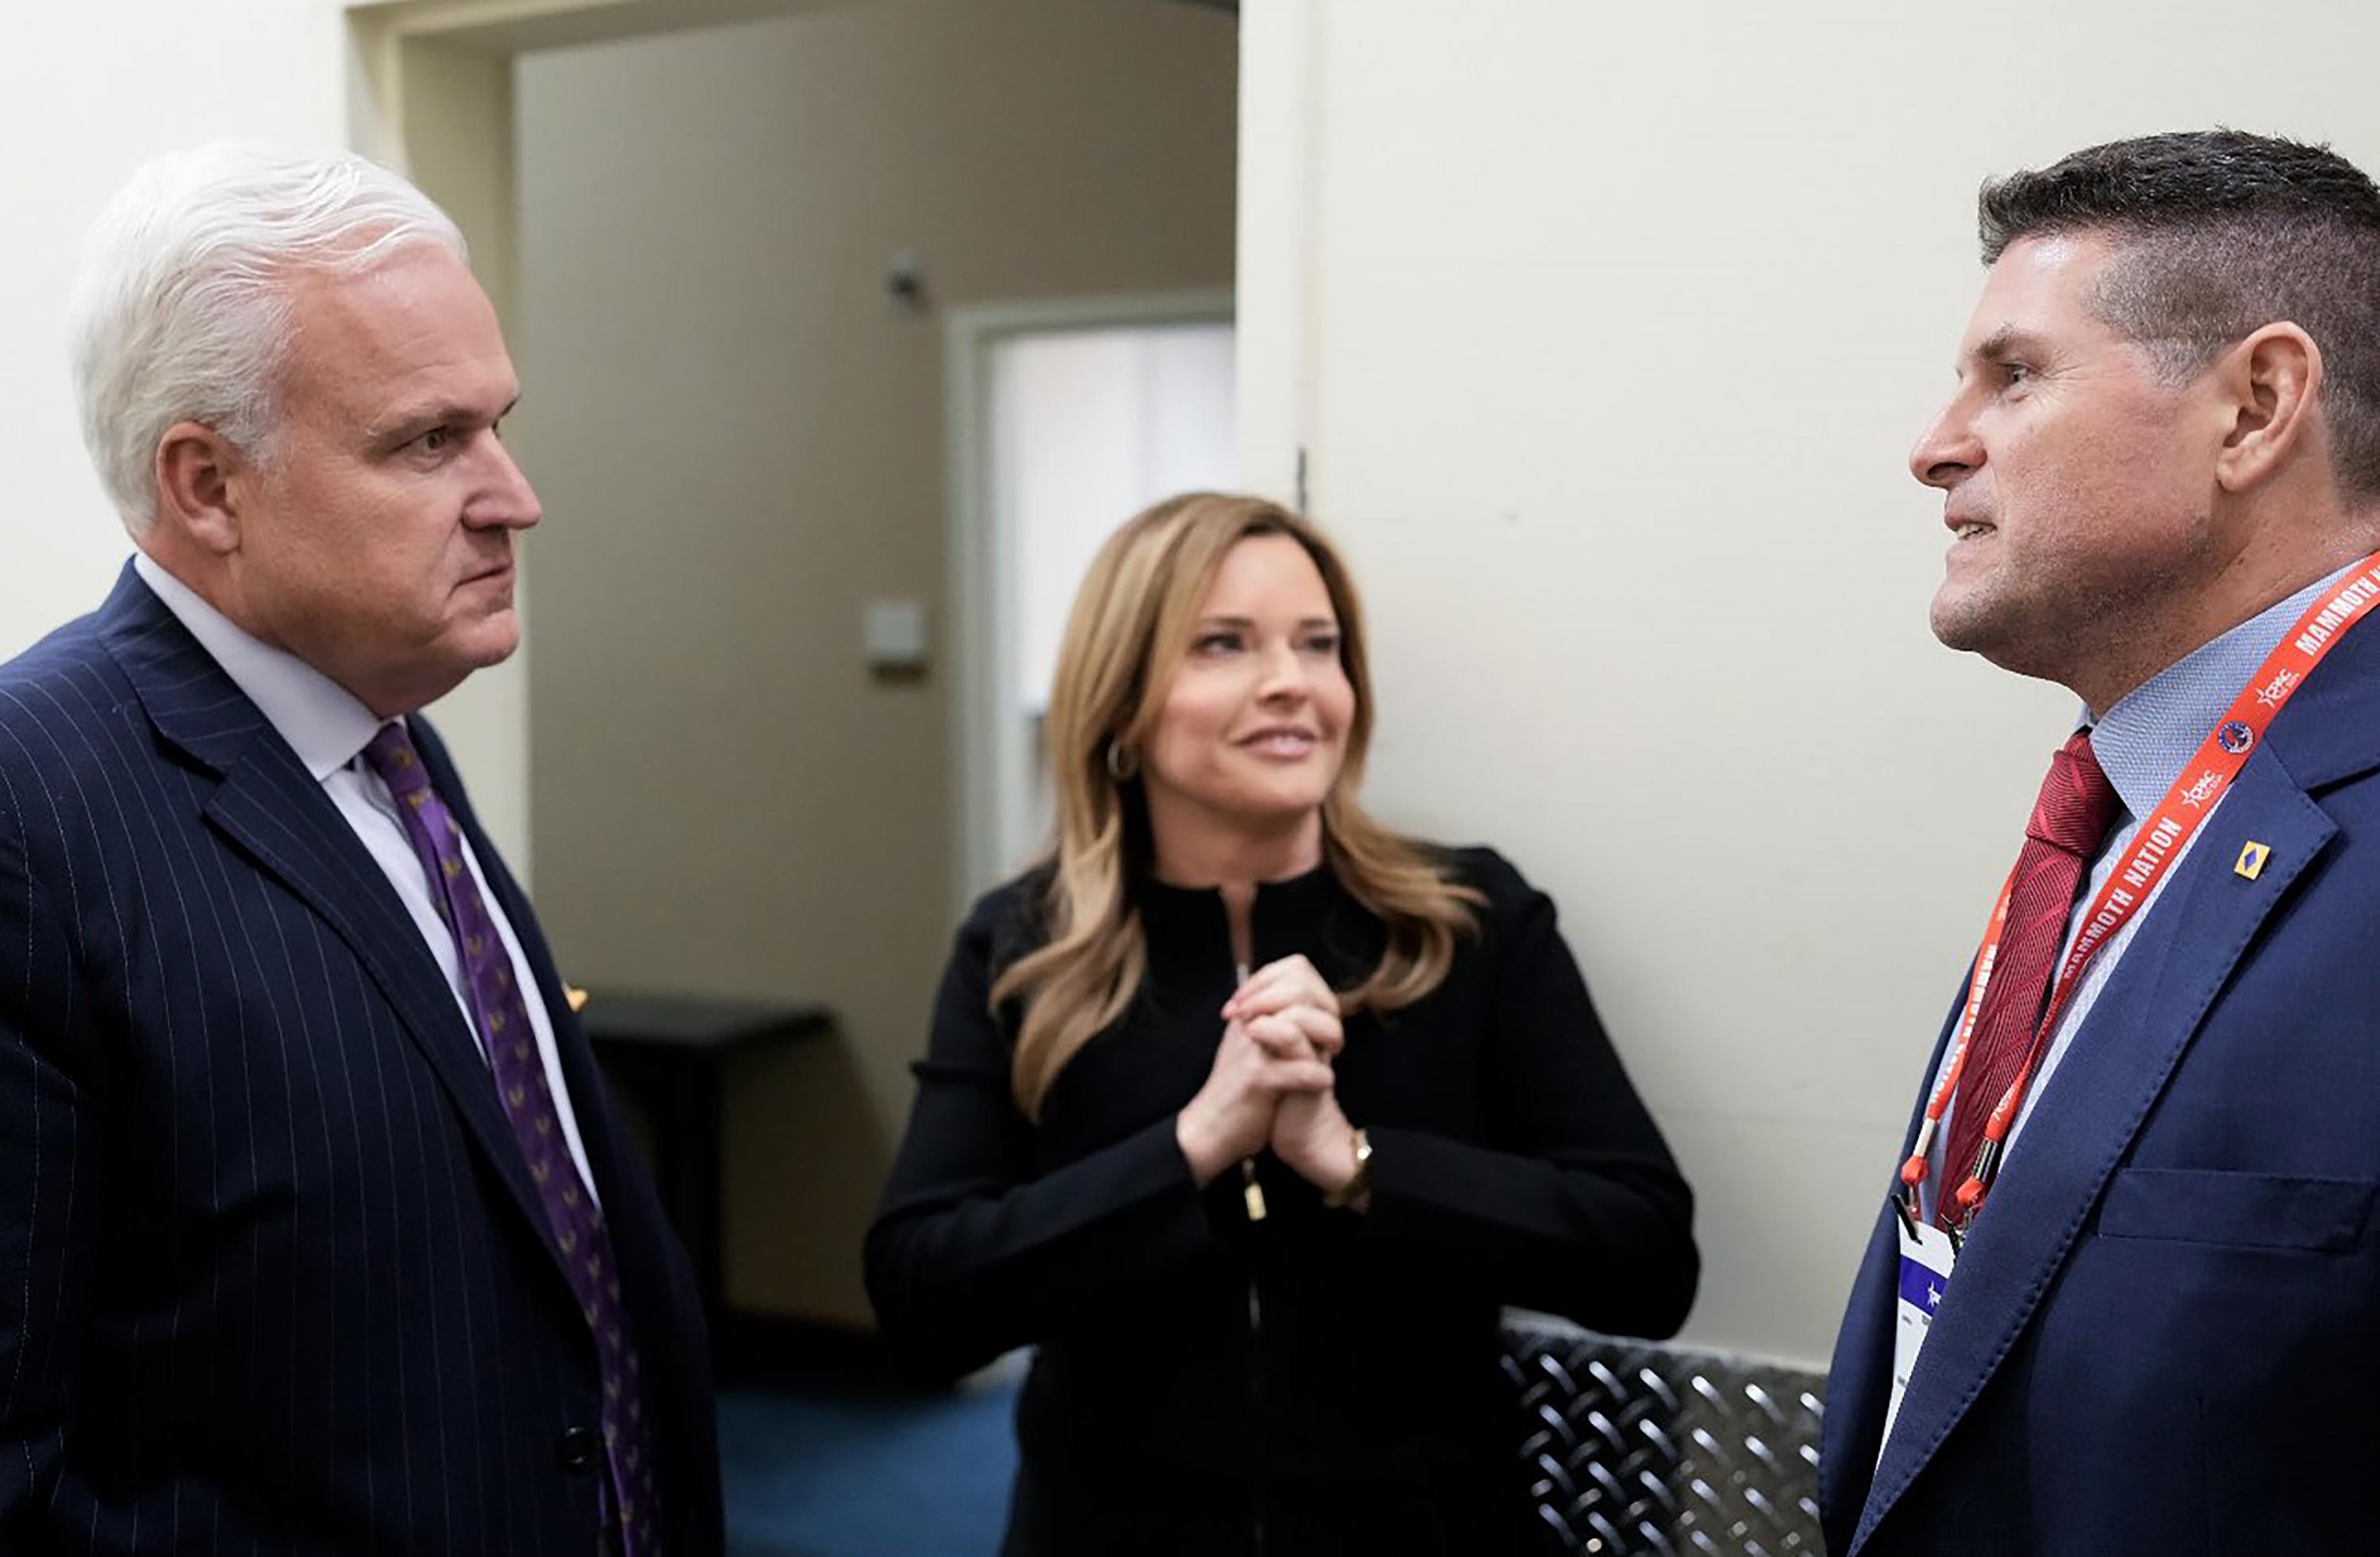 In February 2024, Bukele lobbyist Damian Merlo met at CPAC with Matt and Mercedes Schlapp, respectively the director of CPAC and former director of strategic communications for the Trump administration.